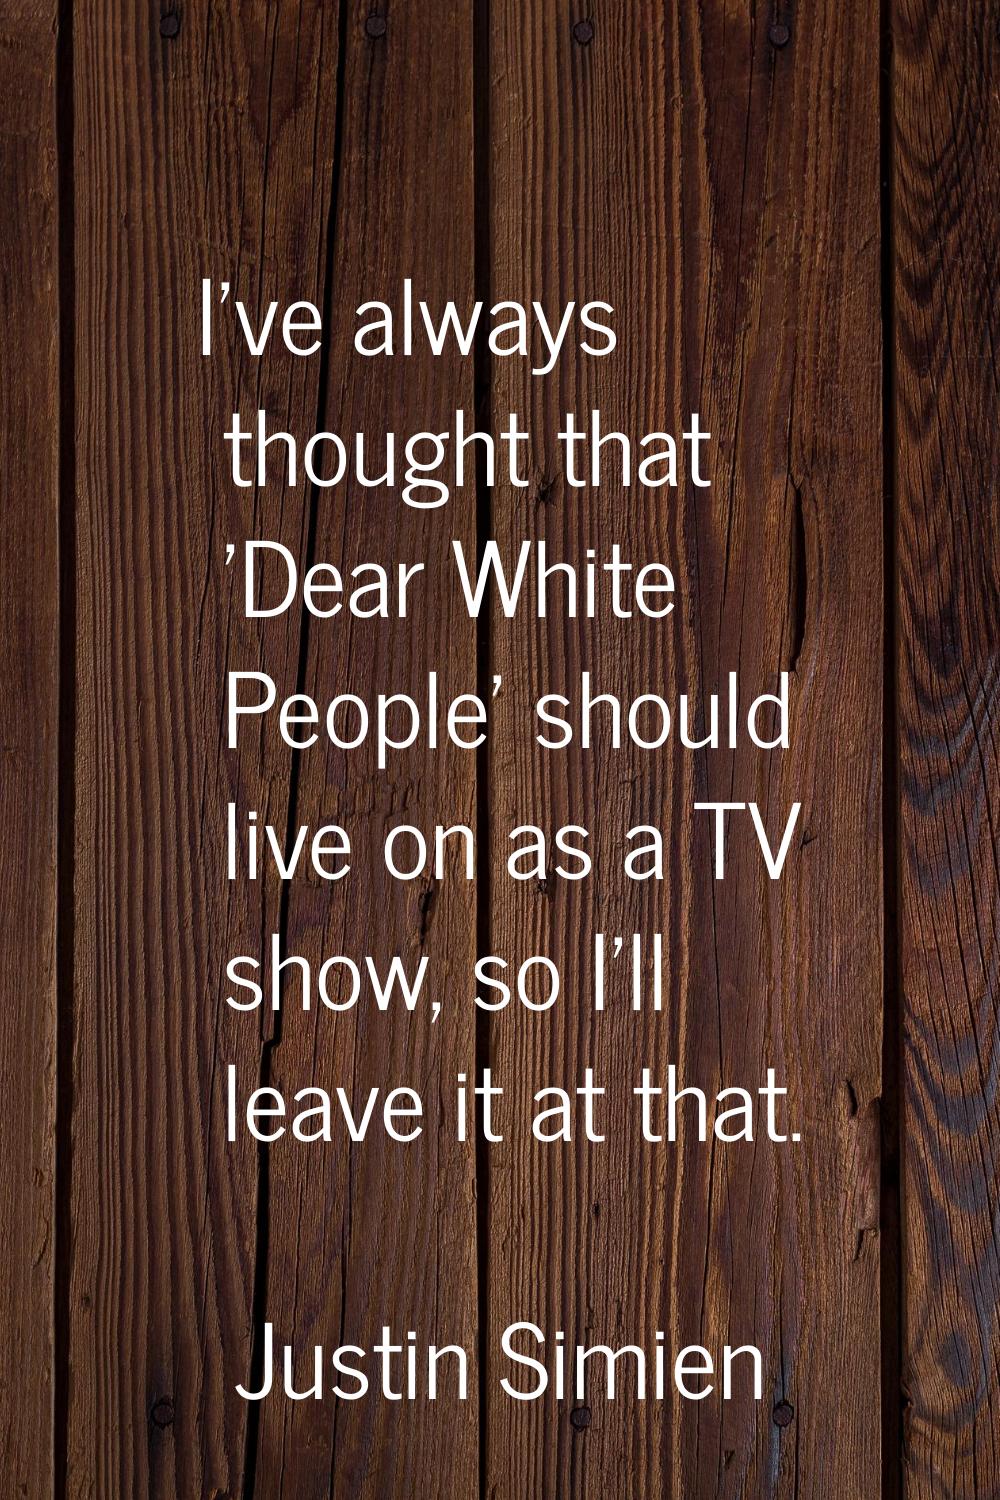 I've always thought that 'Dear White People' should live on as a TV show, so I'll leave it at that.